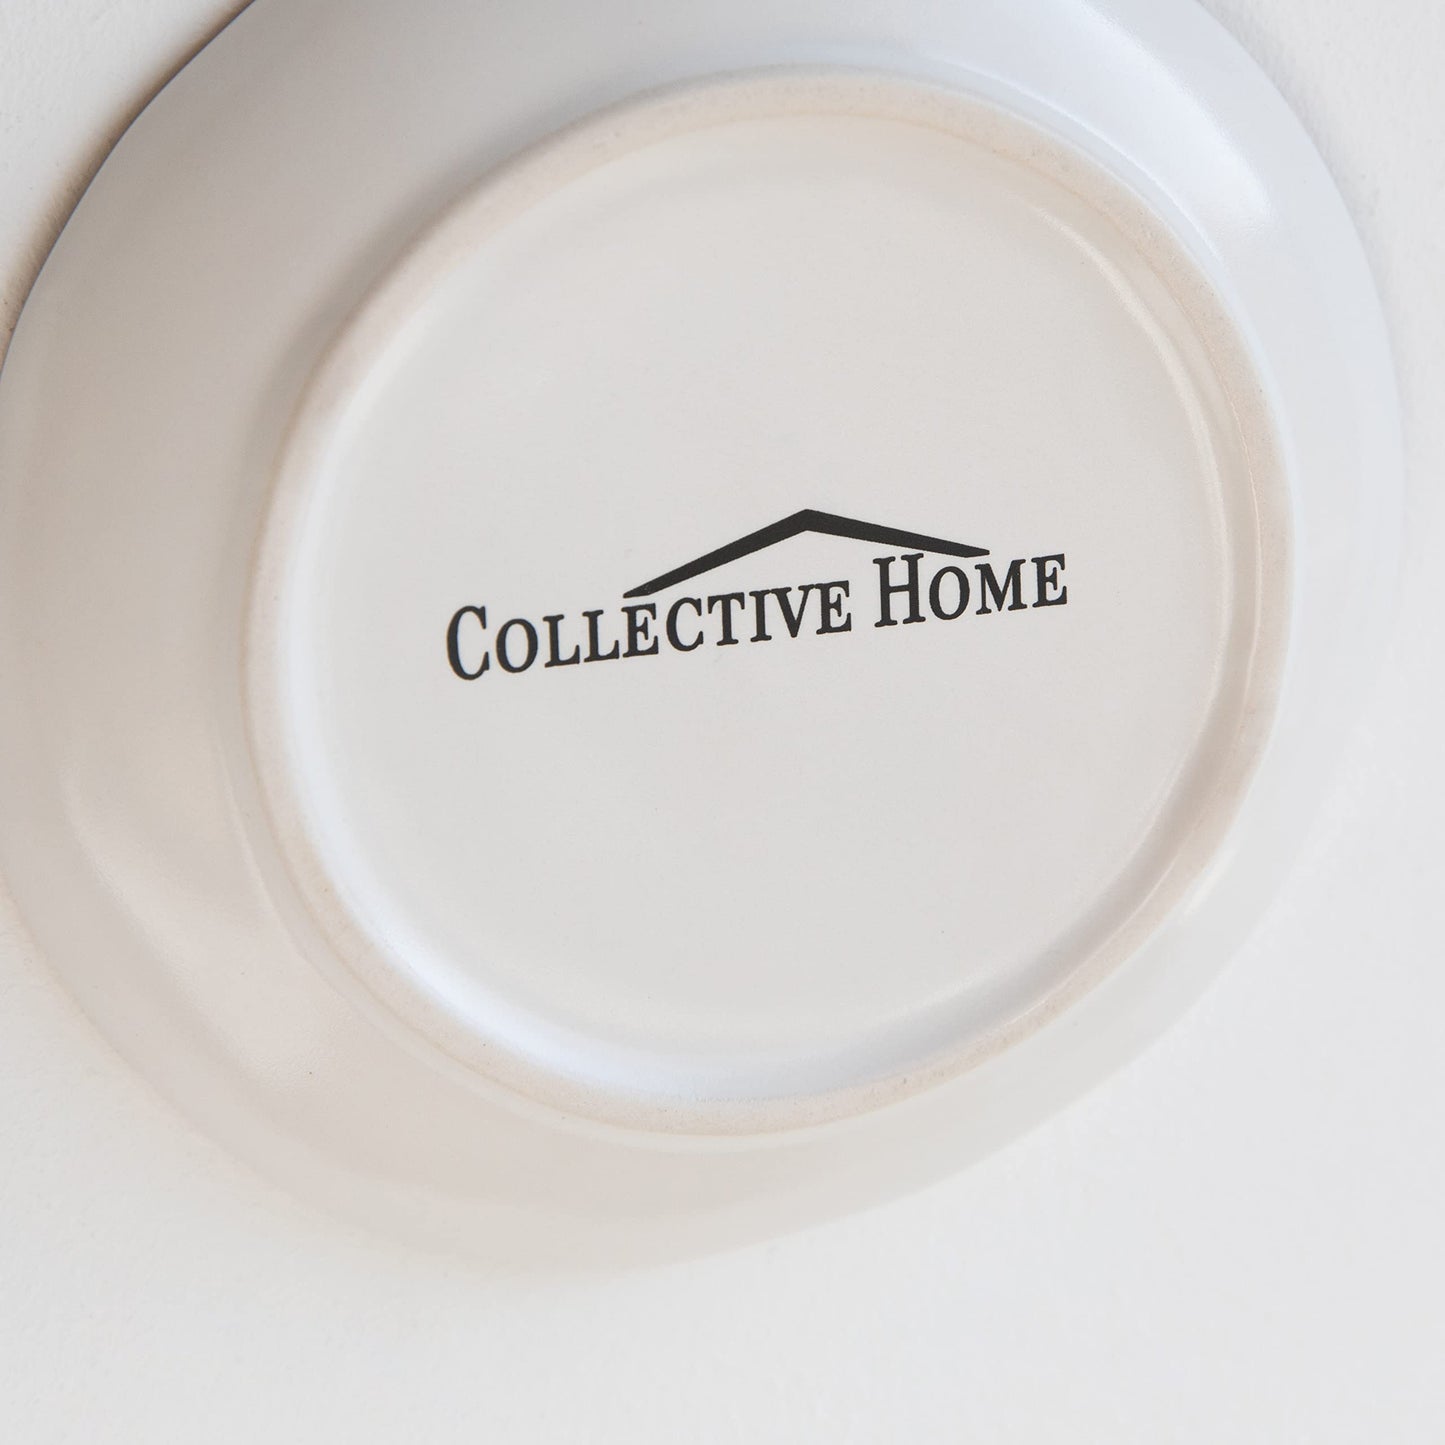 COLLECTIVE HOME - Ceramic Jewelry Tray, Decorative Trinket Dish for Rings Earrings Necklaces Bracelet Watch Keys, Birthday Mother's Day Christmas Gift for Women, 4.75", White Surface (M)